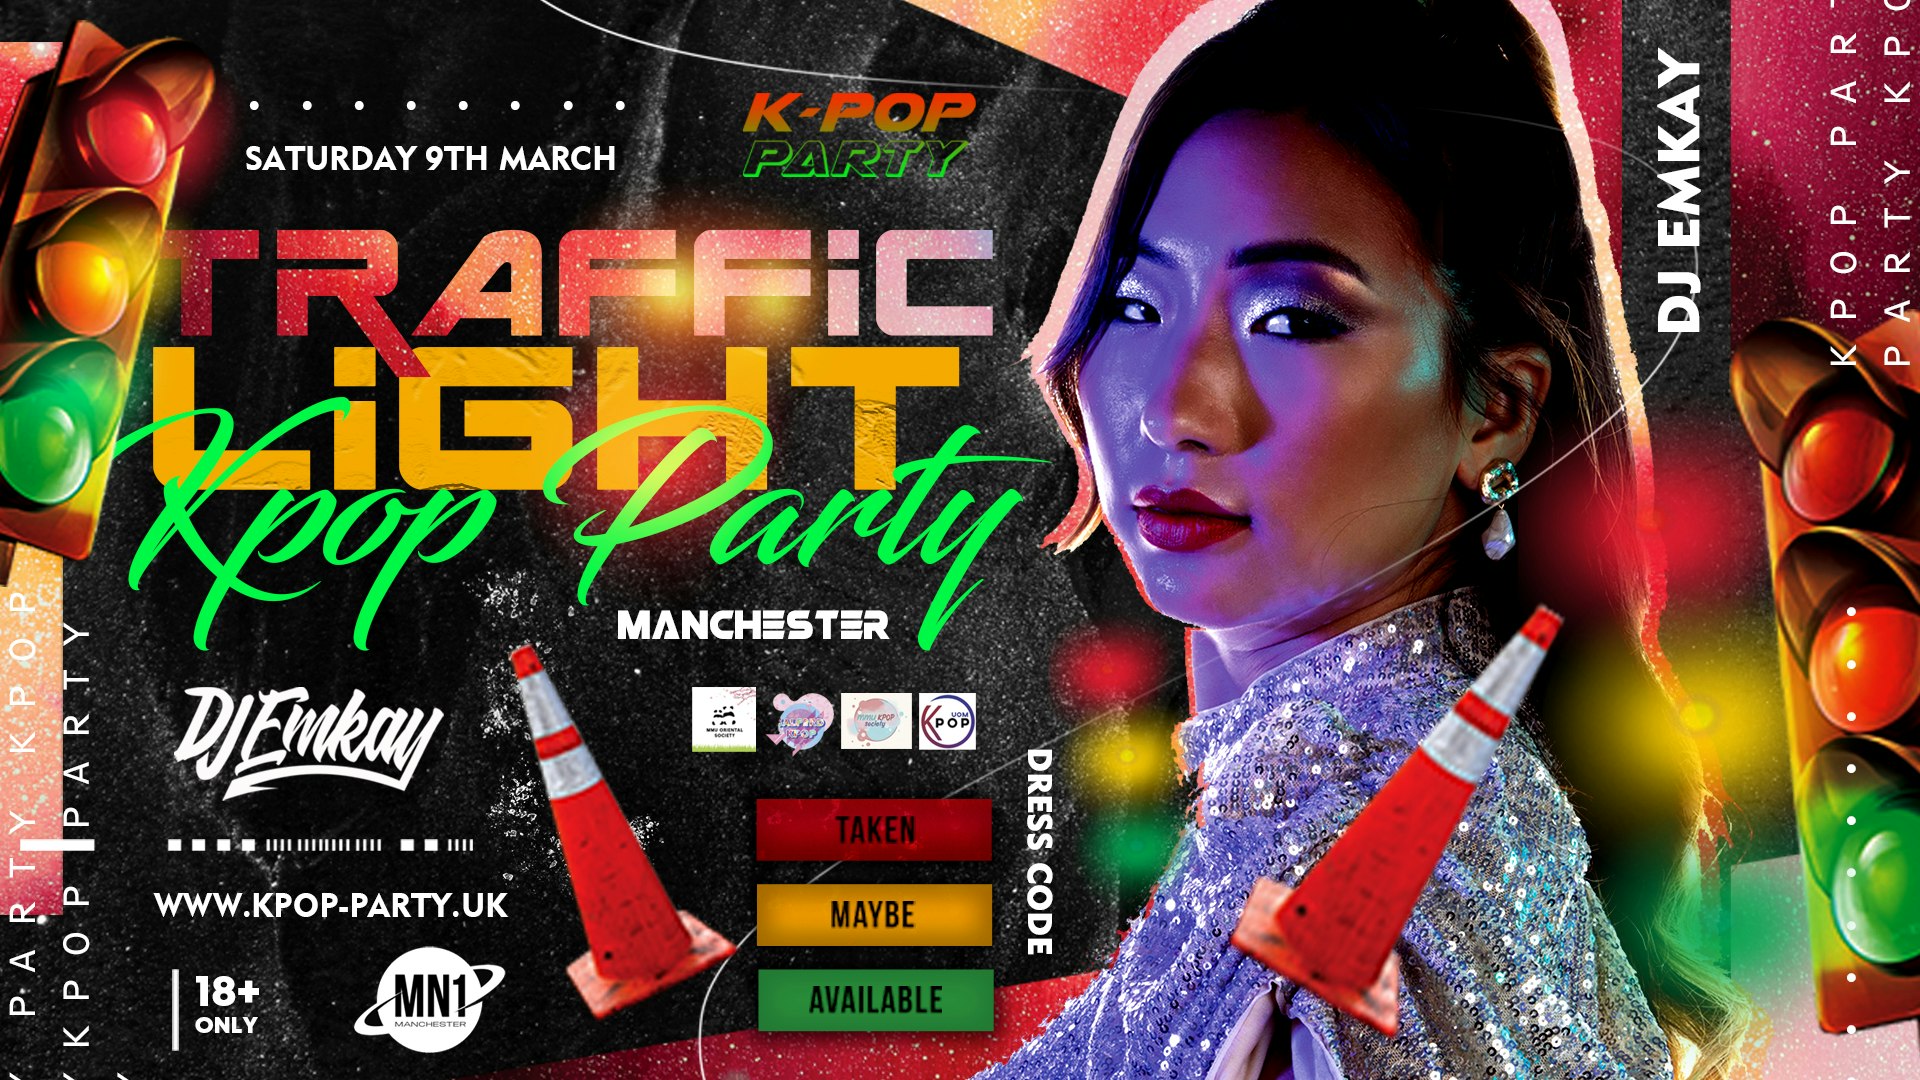 K-Pop TRAFFIC LIGHT Party Manchester with DJ EMKAY | Saturday 9th March